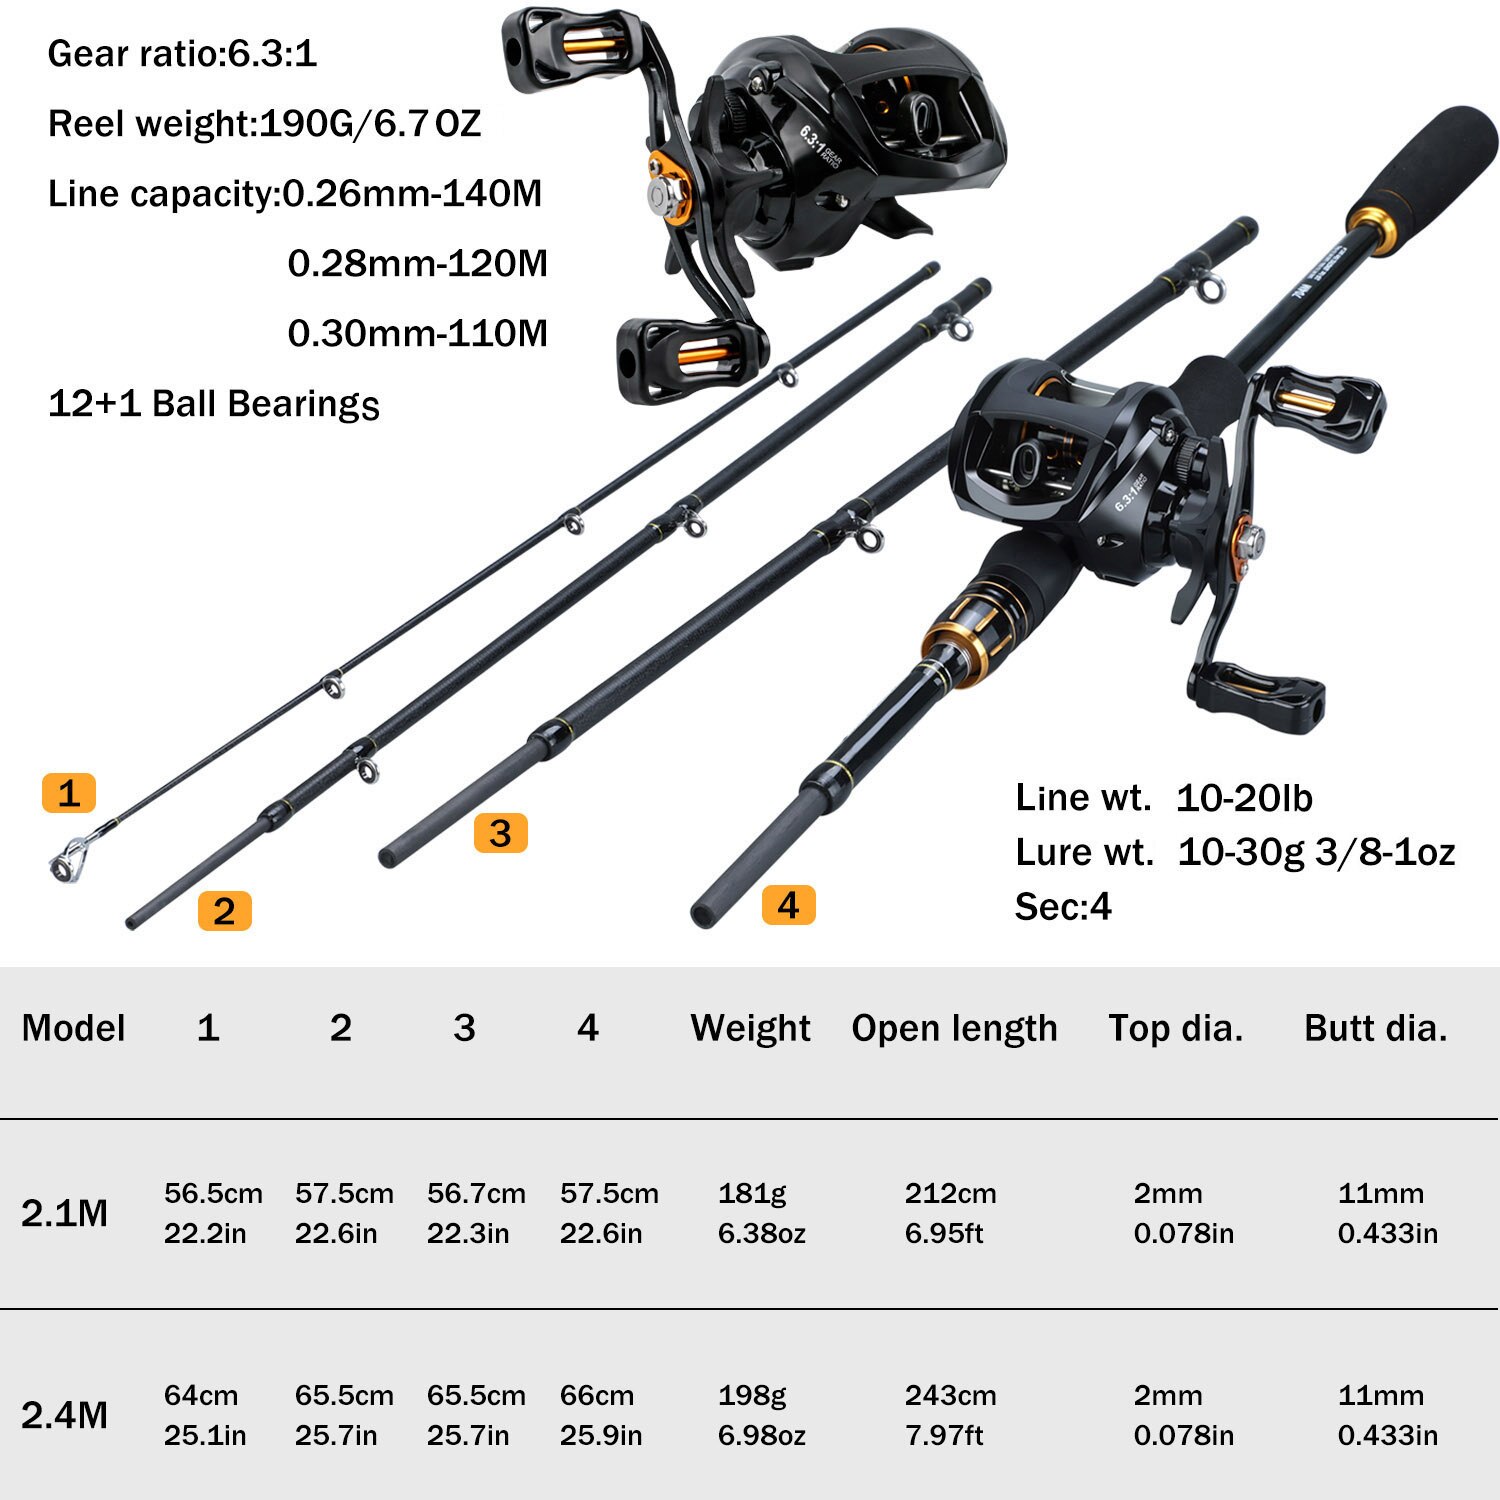 Sougayilang Carbon Fiber Fishing Rod and Reel Combos 4 Section Top Quality Casting Fishing Pole 12+1BB Reel Fishing Set